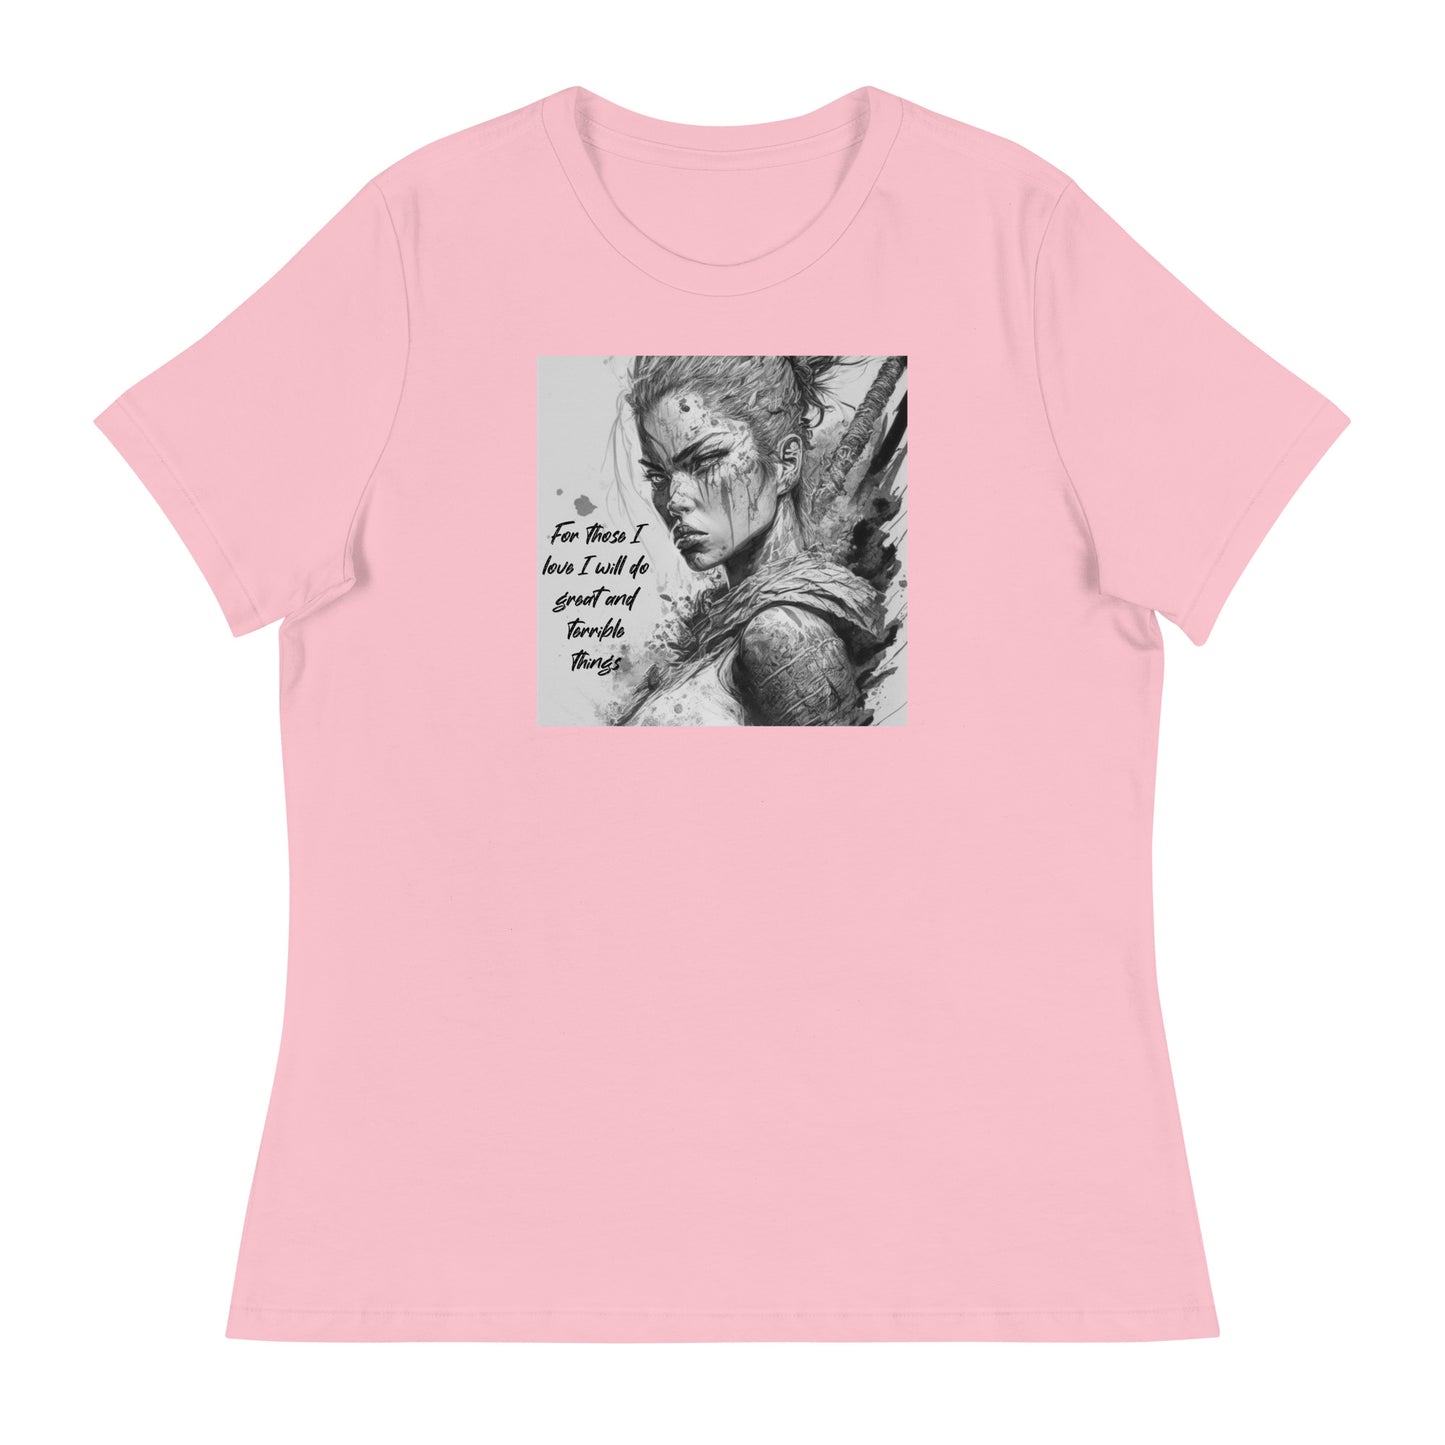 Great and Terrible Things Women's Graphic T-Shirt Pink